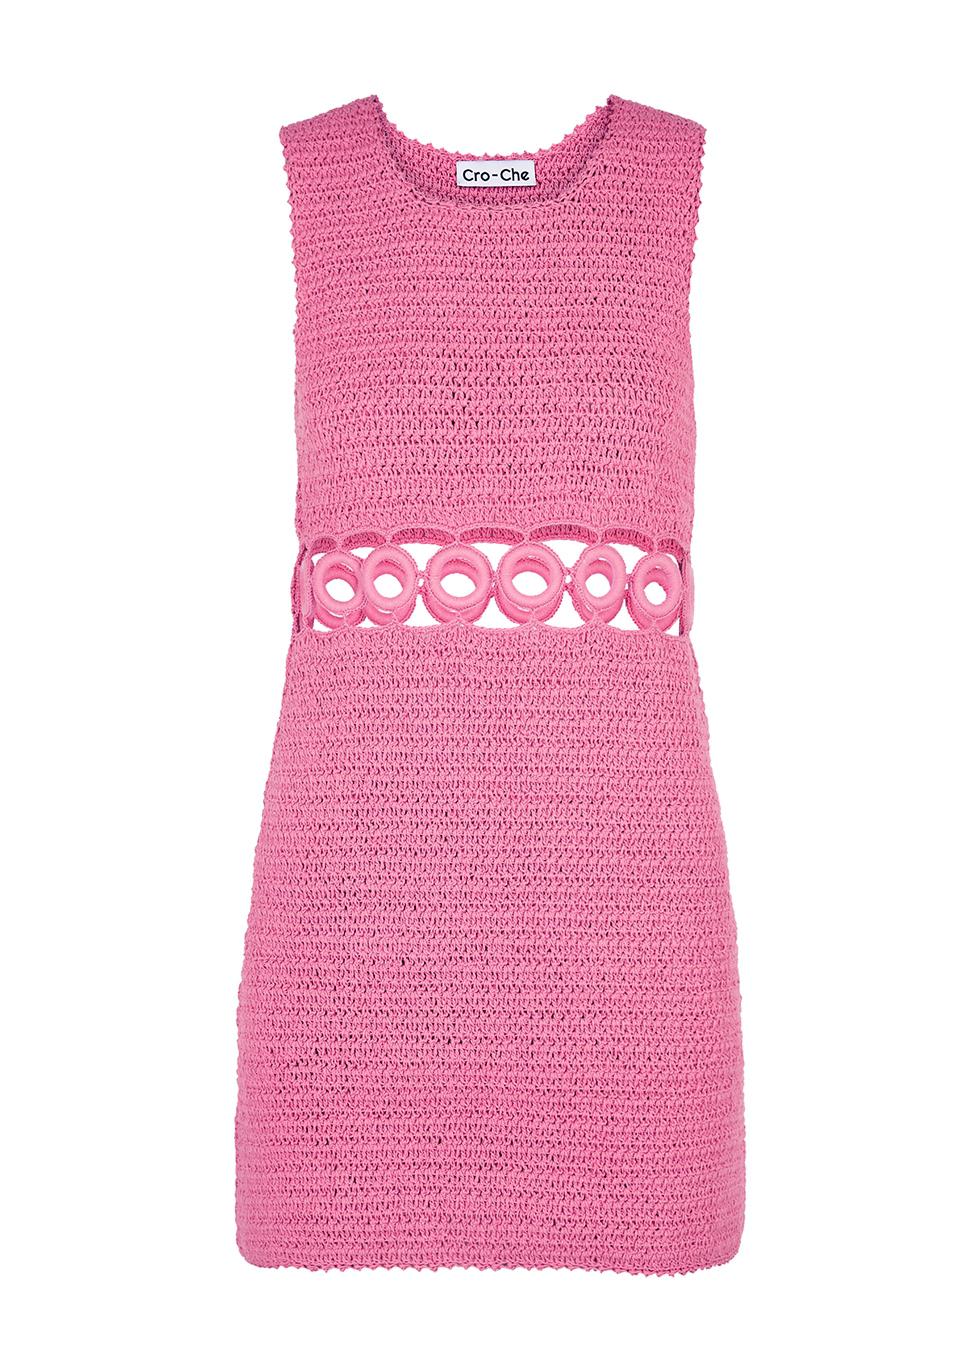 Baby Love pink cut-out crochet dress by CRO-CHE